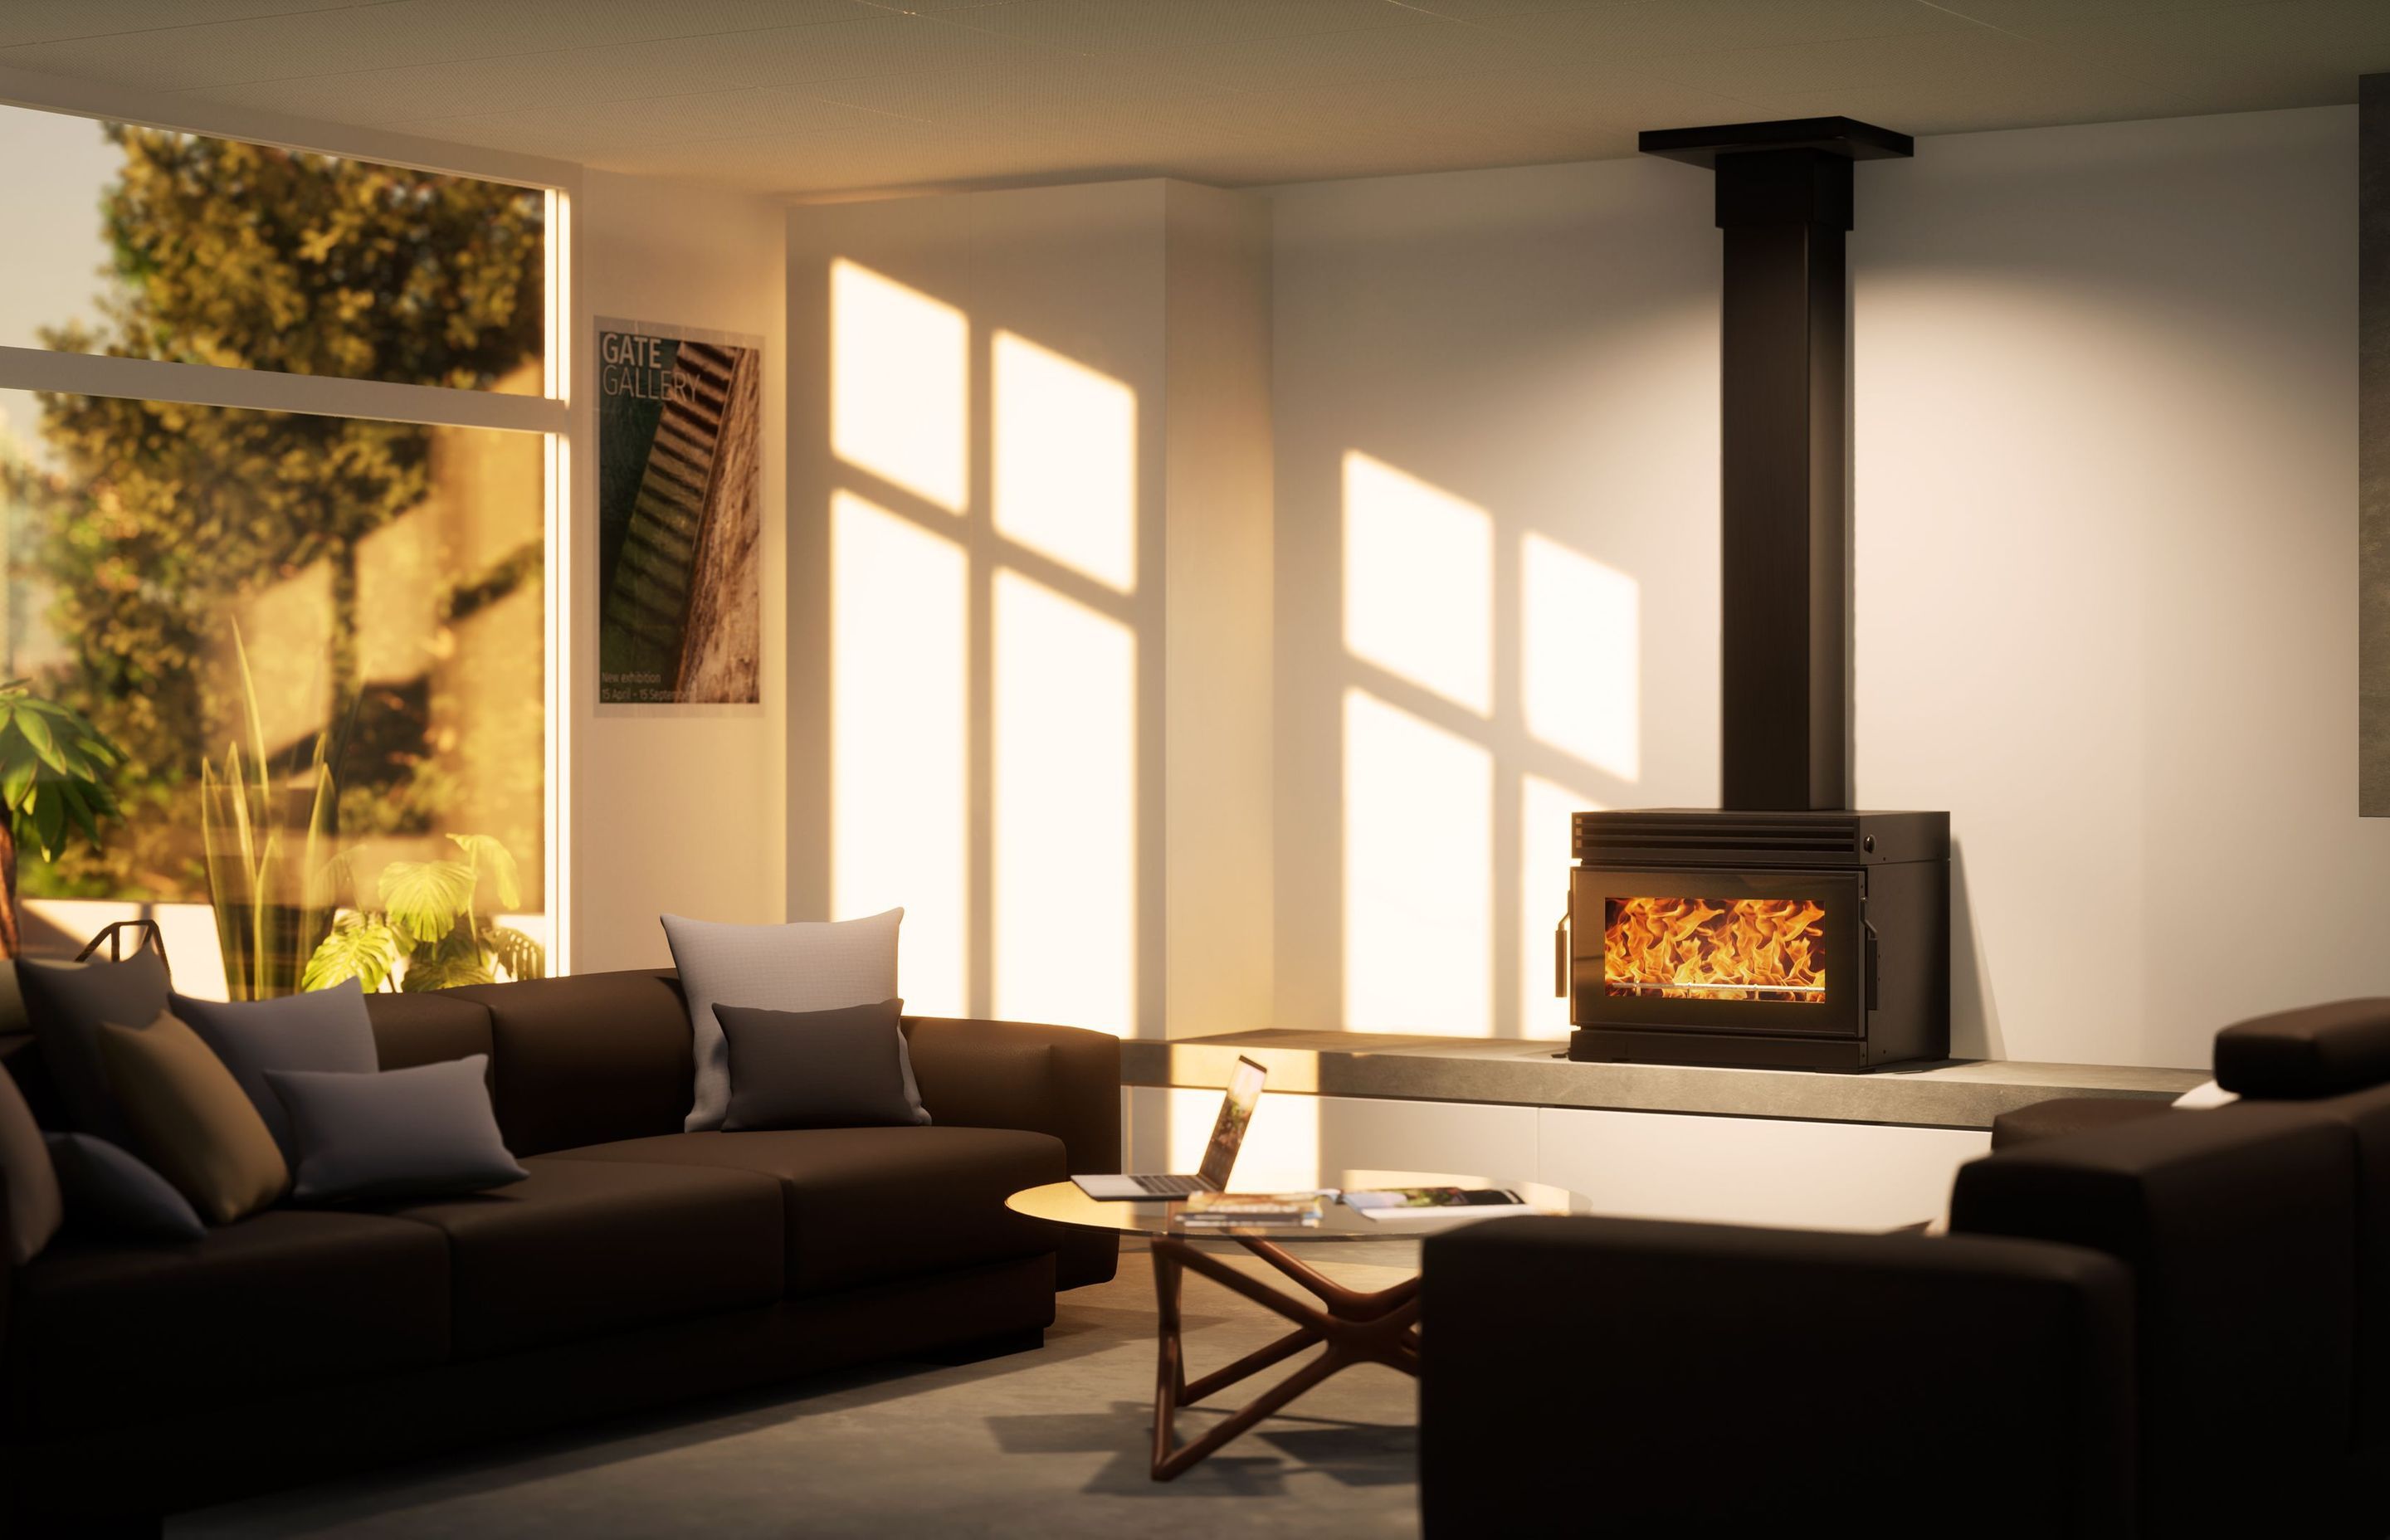 The Olli will heat homes up to 250sqm with ease and is recommended to be used alongside a heat transfer kit for a complete home heating solution.